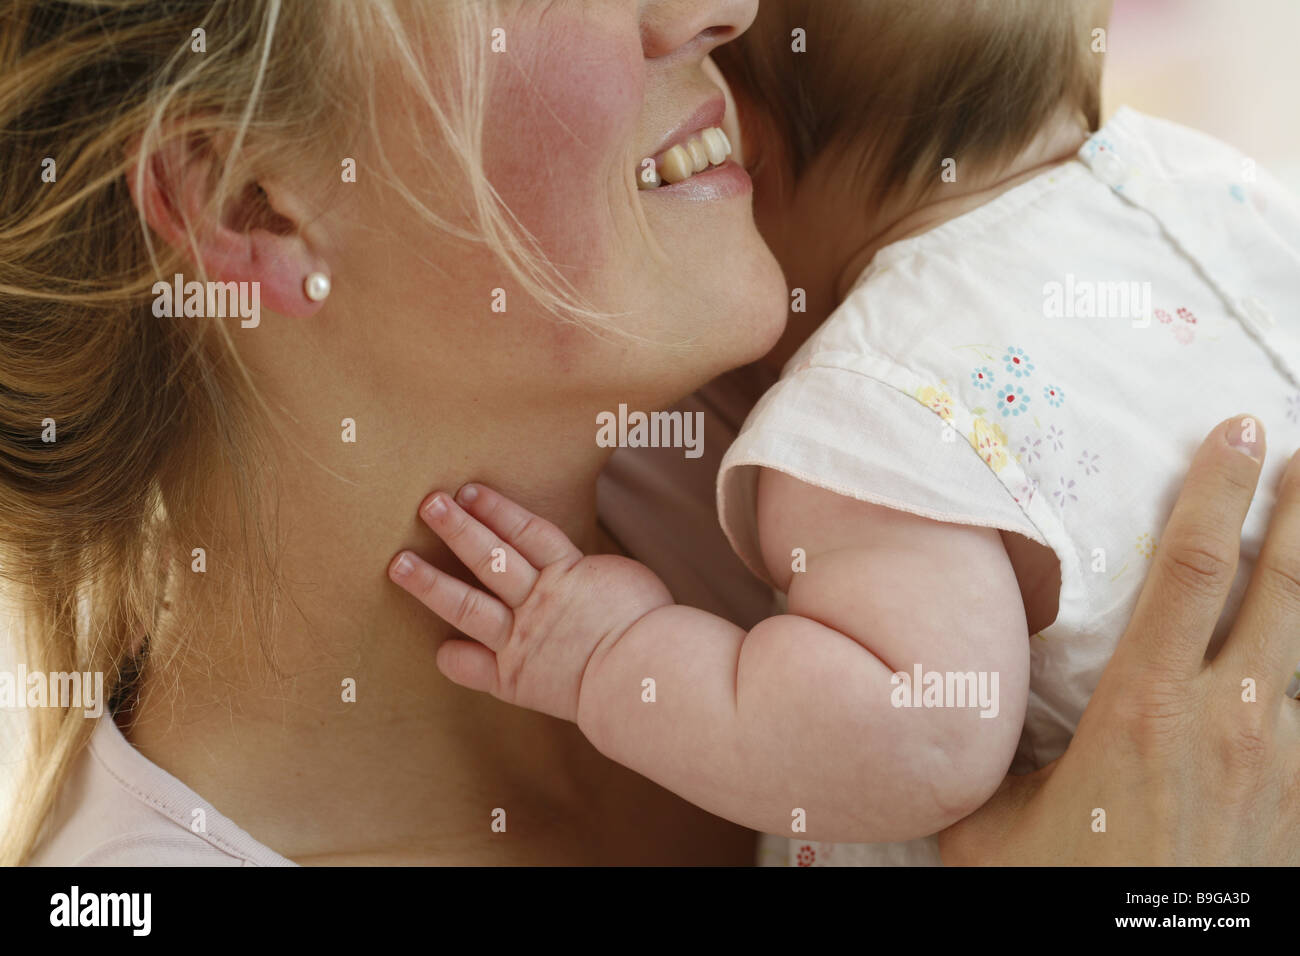 Mother baby embraces smiling baby-hand portrait excerpt close-up  20-30 years 5 months broached attention excerpt baby Stock Photo